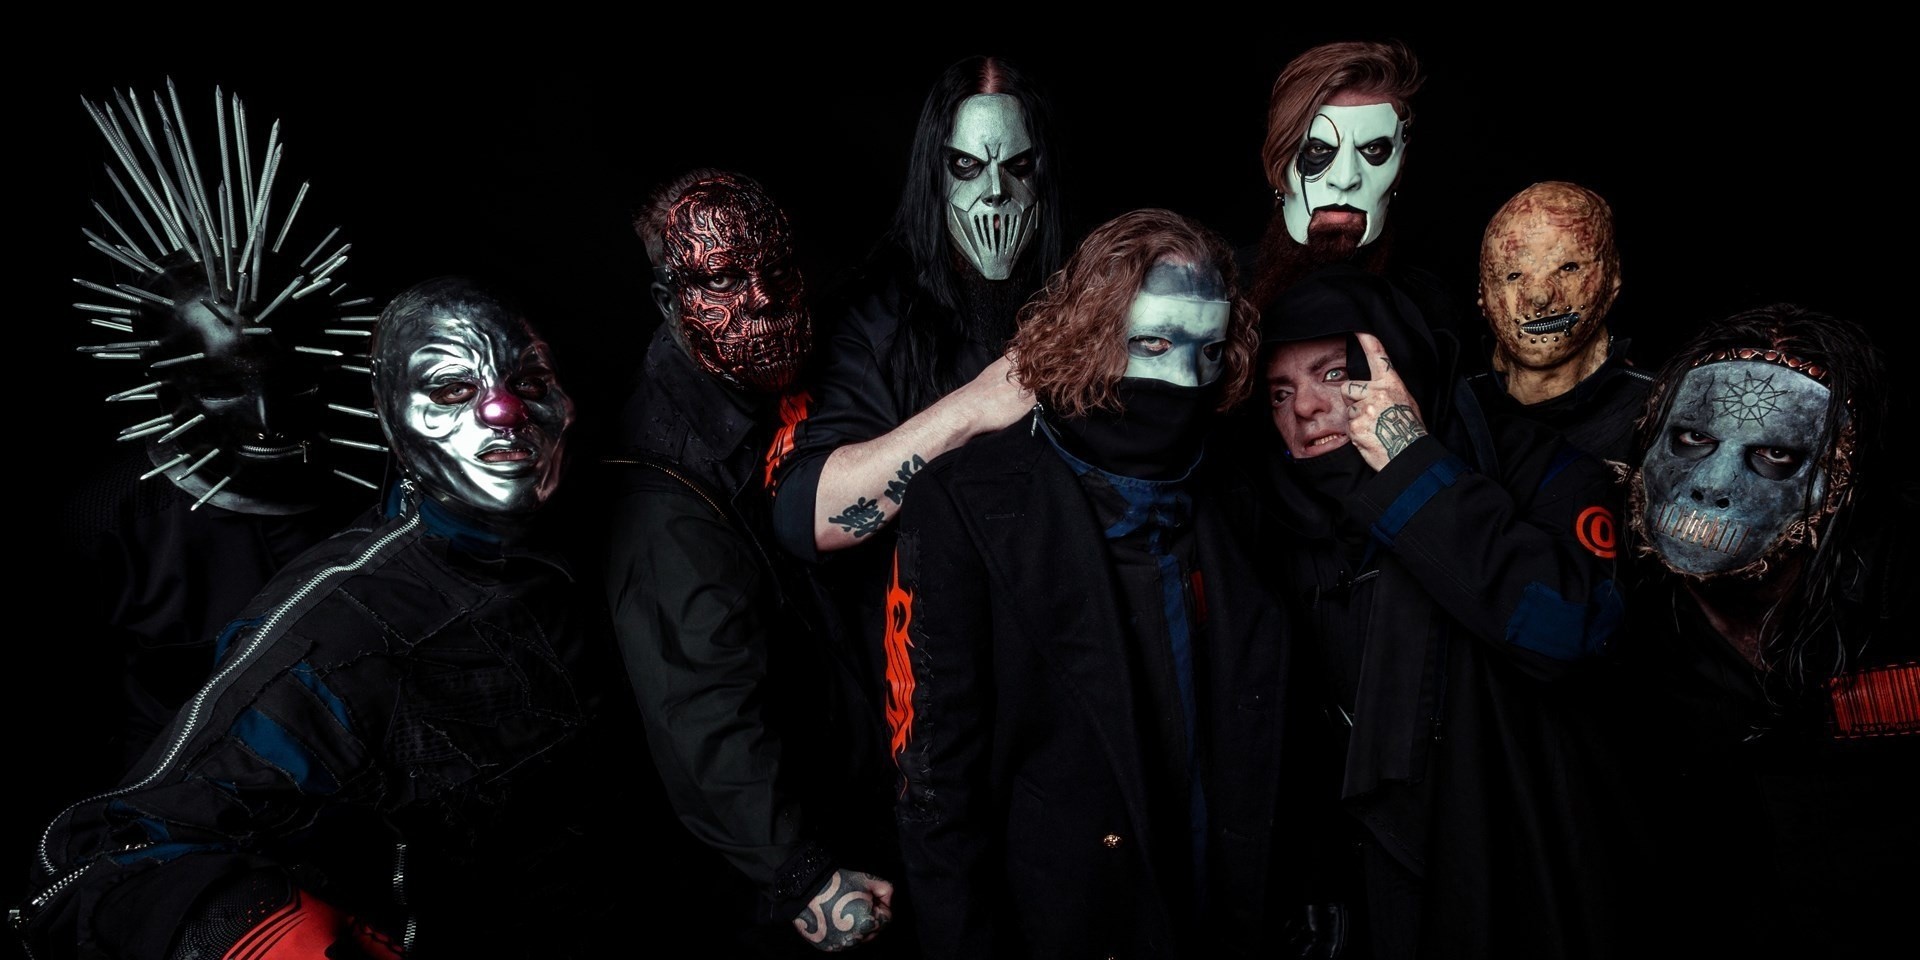 Slipknot announces Knotfest Japan for 2020 – Slipknot, Korn, Anthrax and more to perform 